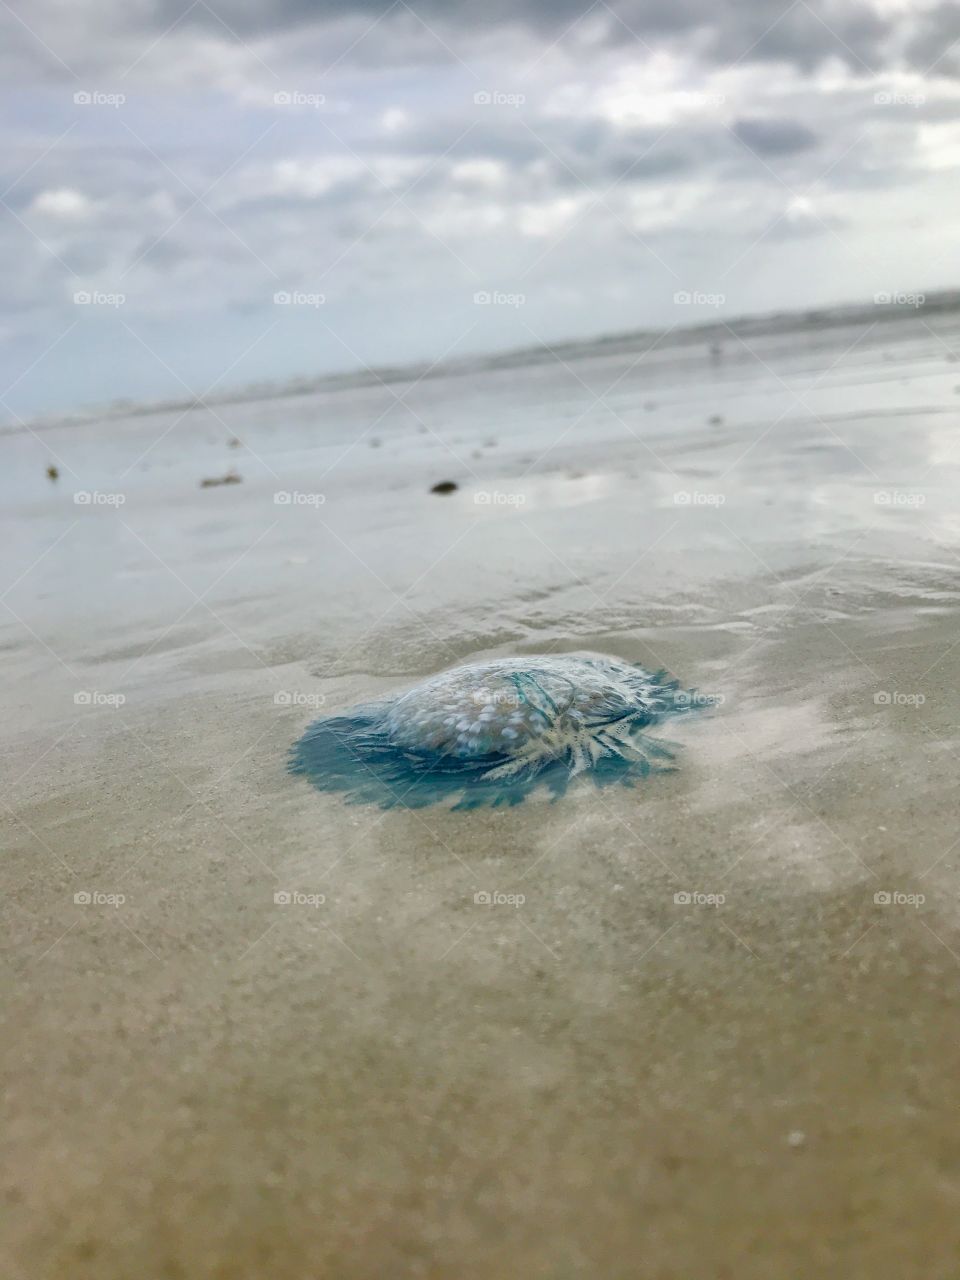 Blue button jellyfish on shore 